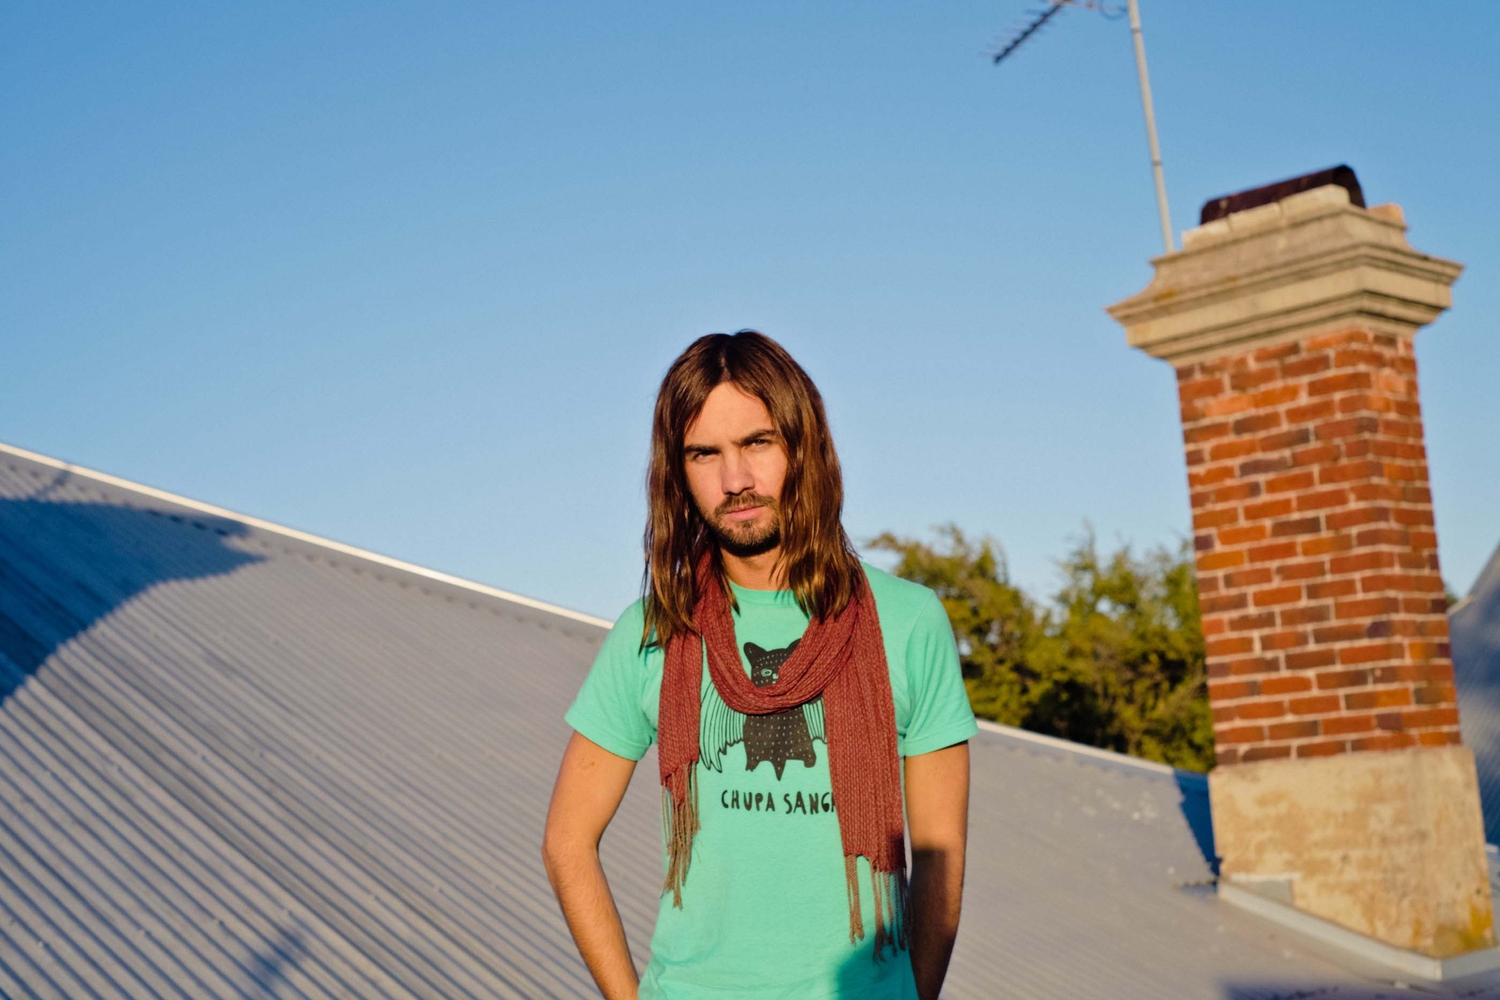 Tame Impala: "The feeling that I’m in unknown territory is the most exciting part"